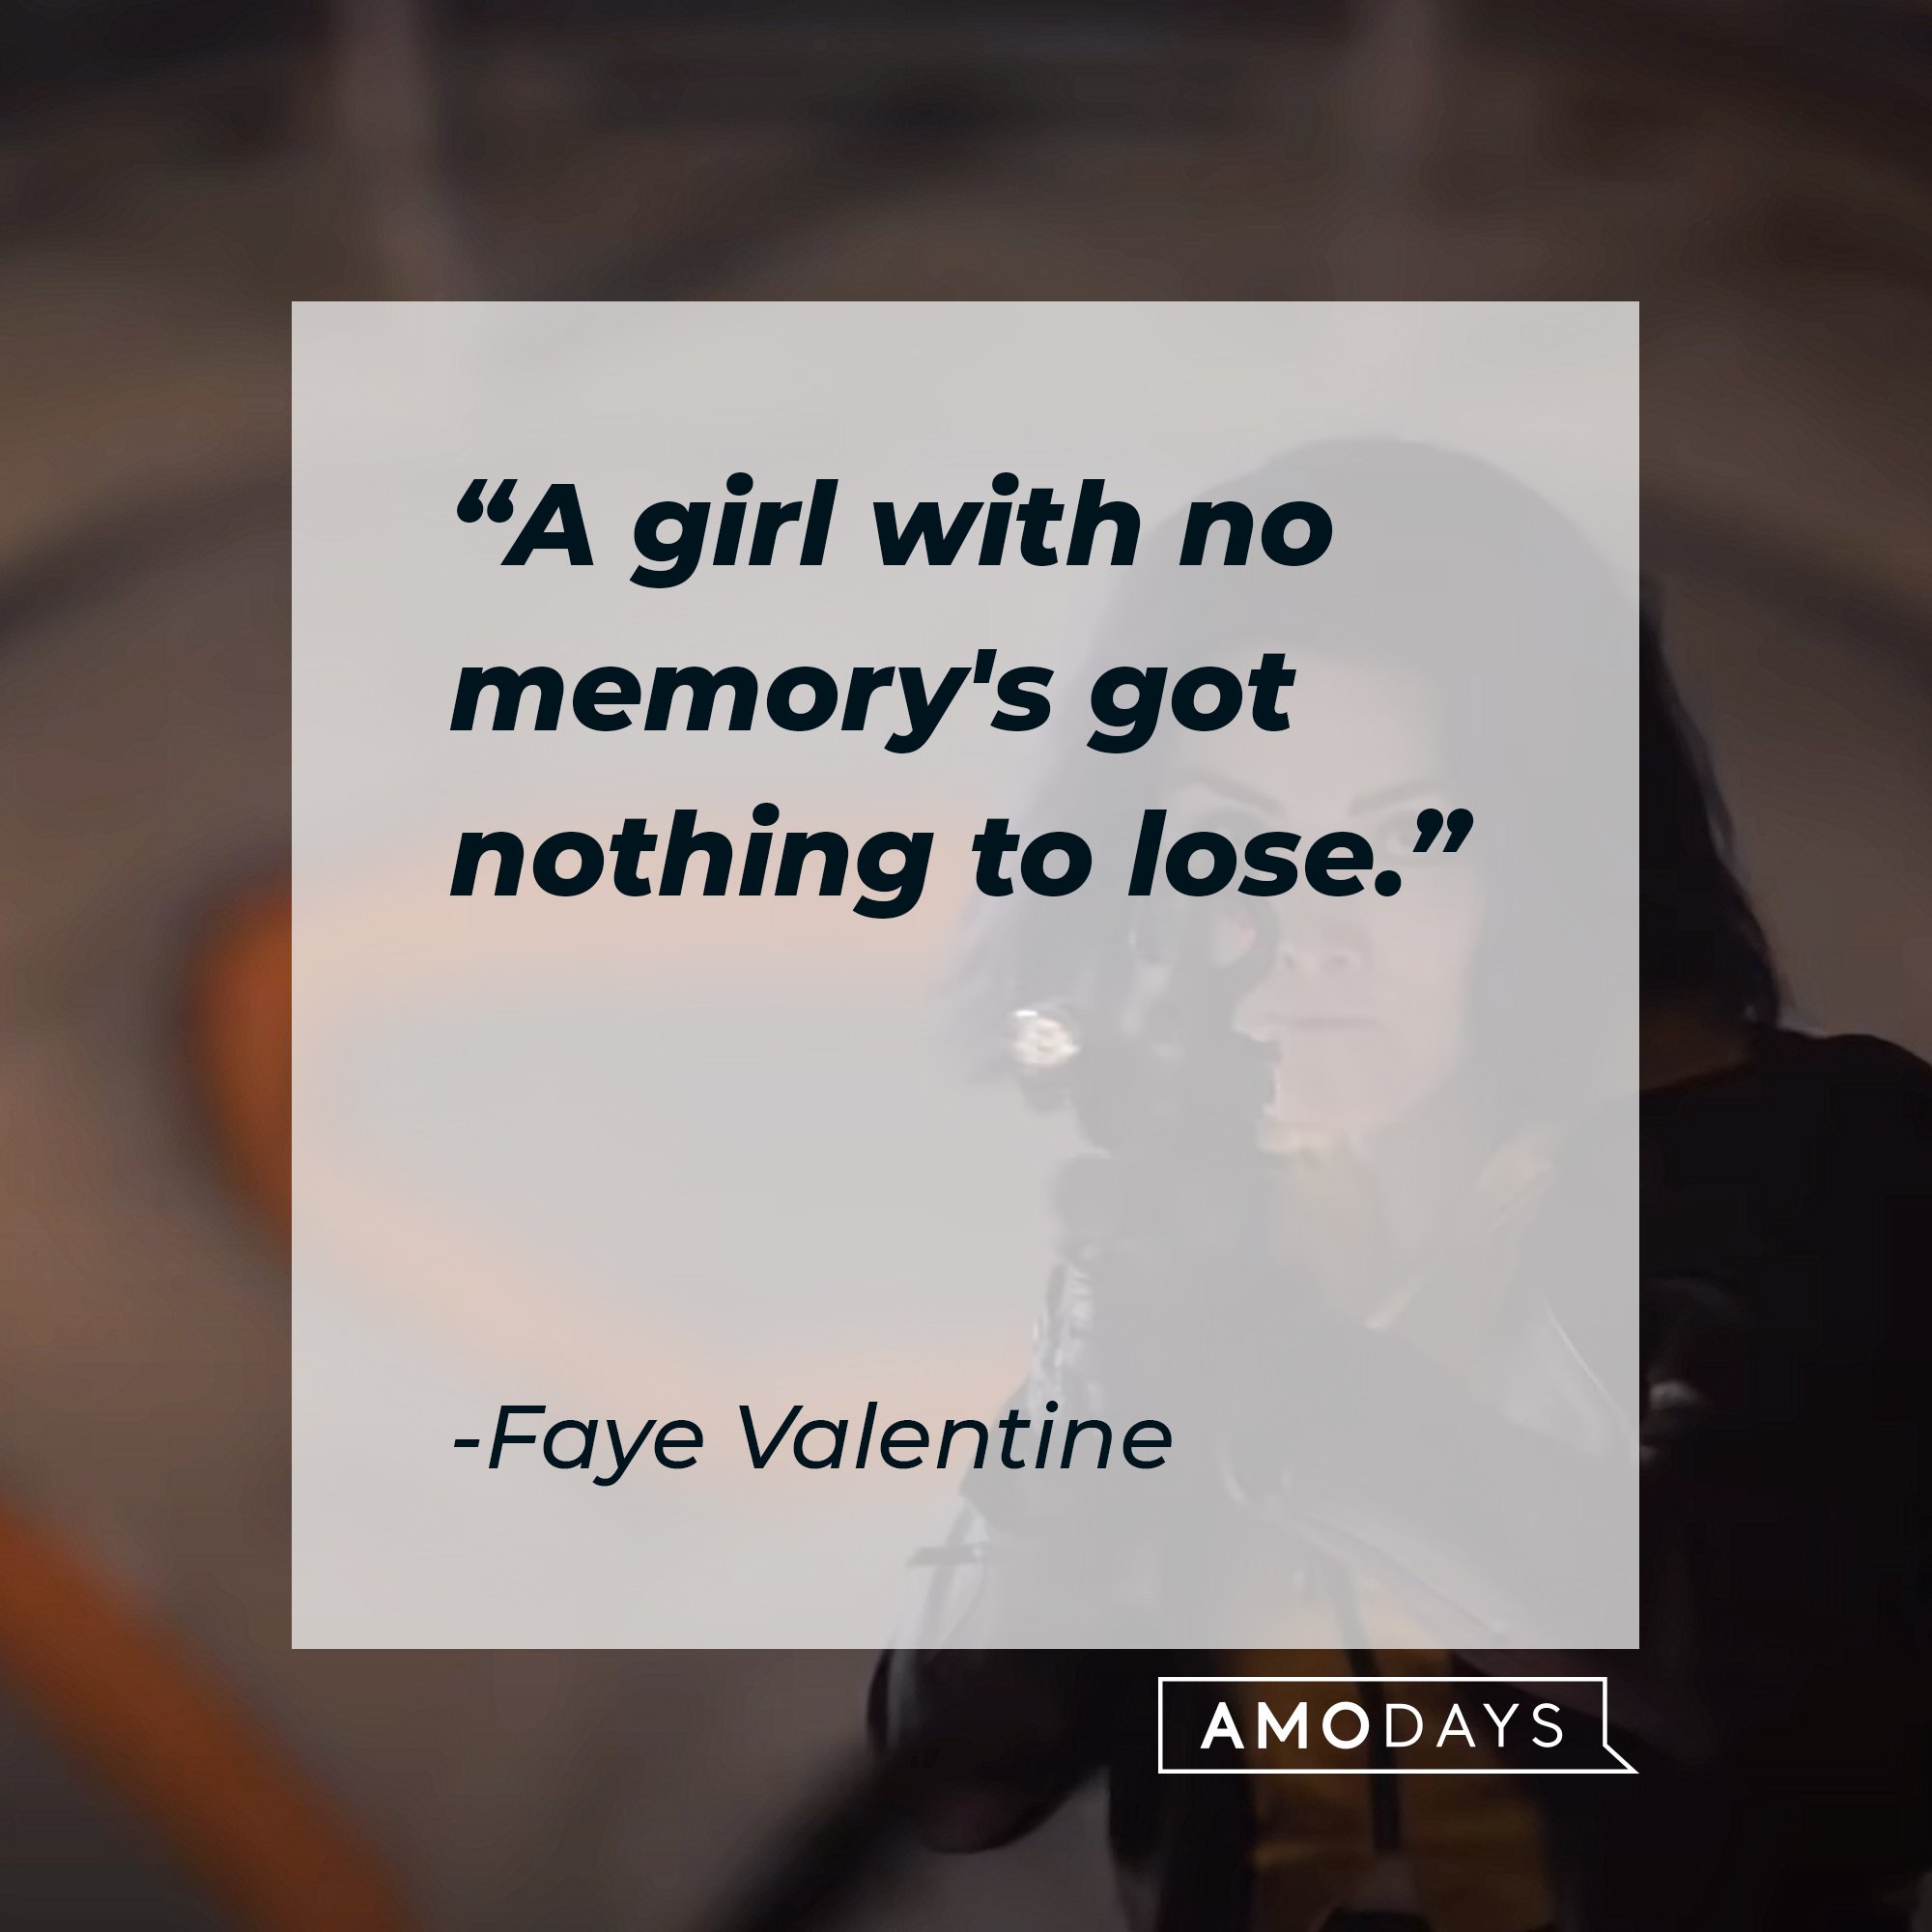 Faye Valentine’s quote: "A girl with no memory's got nothing to lose." | Image: AmoDays